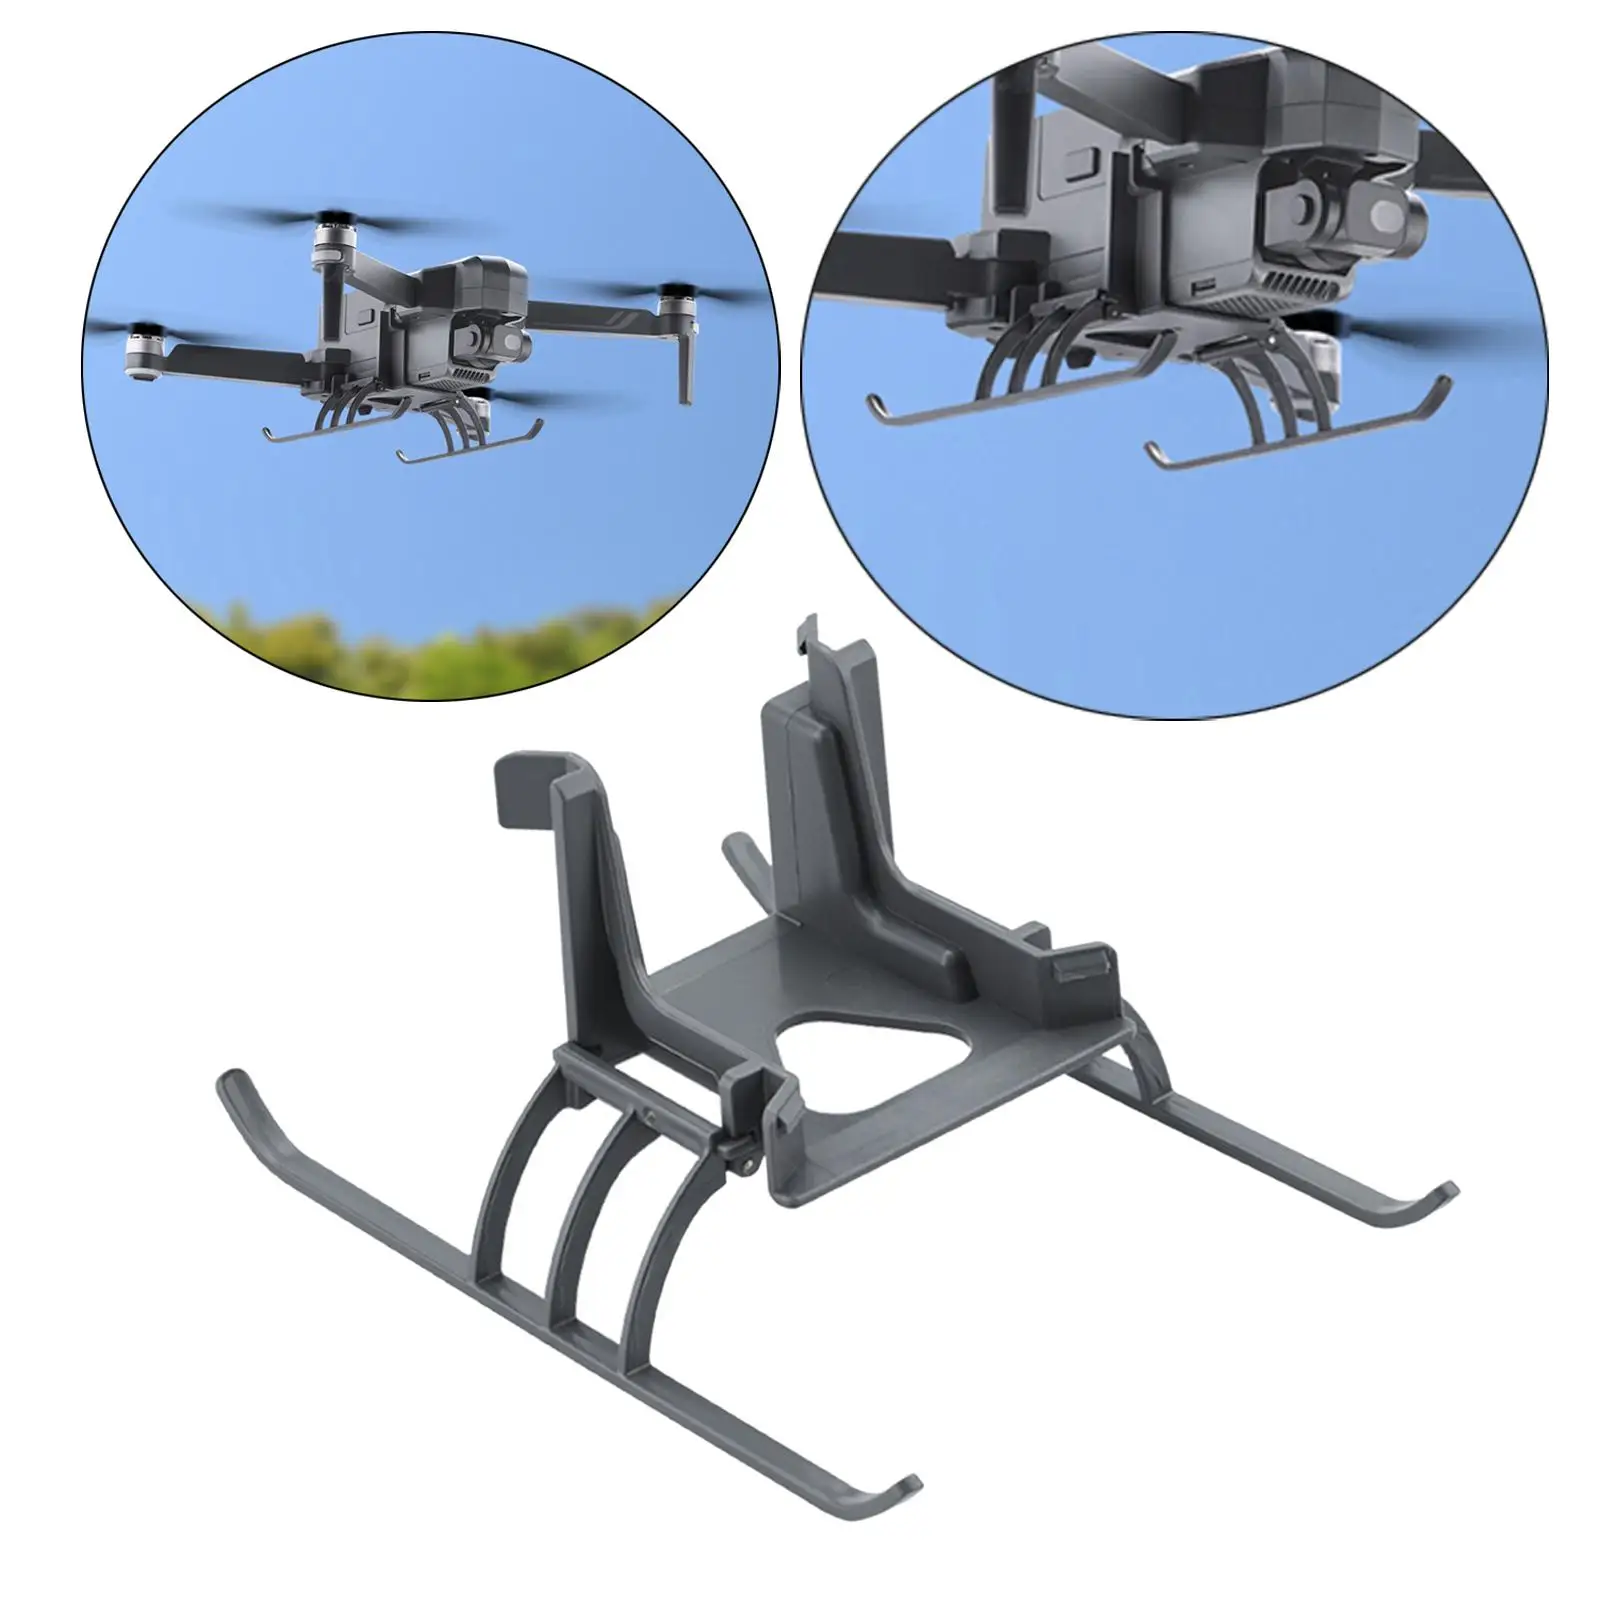 Landing Gear Leg Gimbal Guard Protector Feet Extensions Heightened Extended for Sjrc F11S Drone Increase Height 29mm Portable